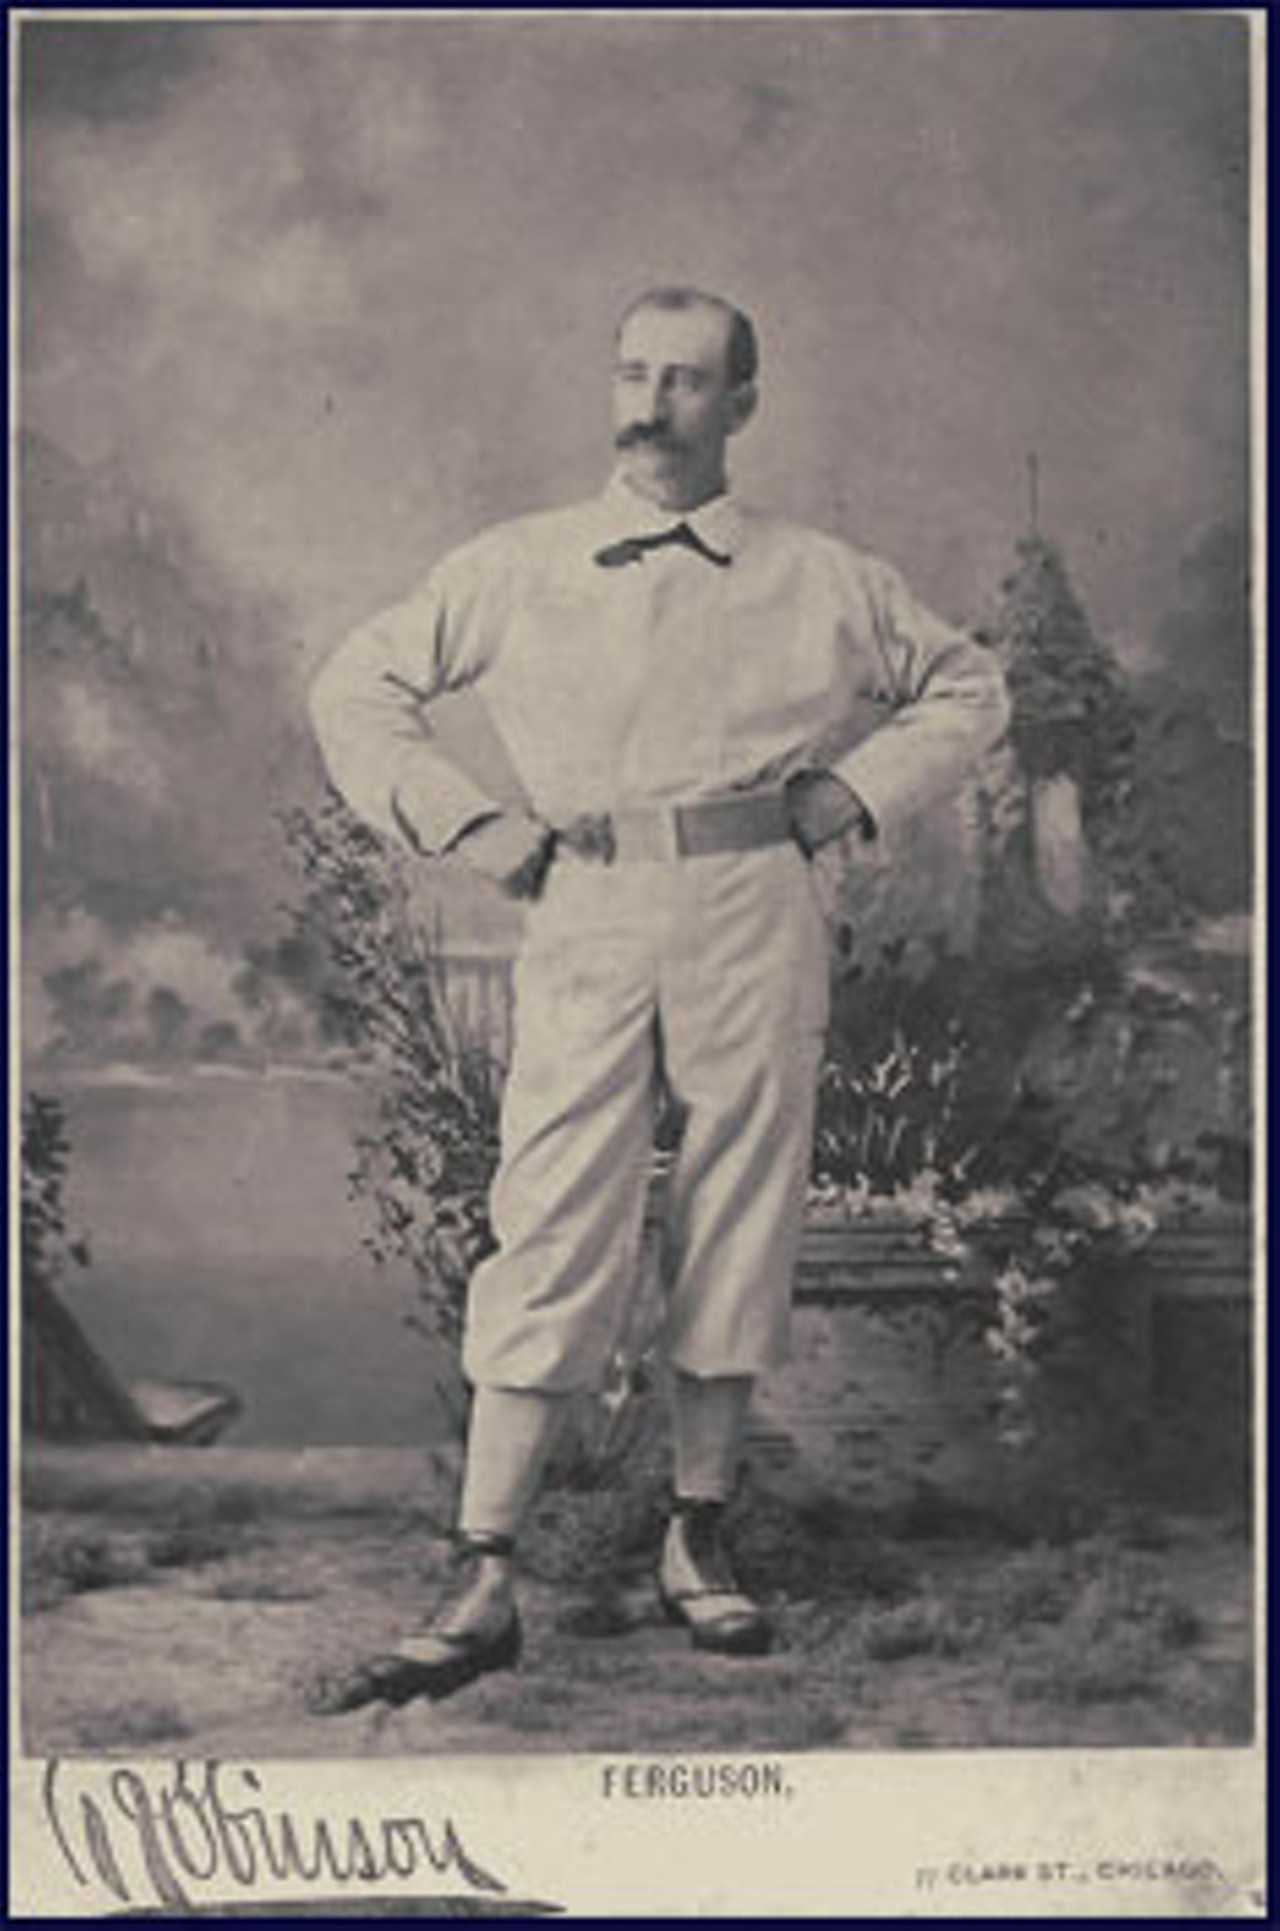 10. Bob Ferguson
The 1880's were the first golden age of the mustache in baseball. Unfortunately, photos from that era are few and far between, and trying to choose just a lucky few from the heavenly thickets of facial hair that were so common in those years is a task King Solomon would ask to be taken from him. Thus, I shall let the glorious mustache of Bob Ferguson stand for all those in the formative days of the game, those titans of the nineteenth century who sported such wonderful facial coiffage. 
Look at it. The word elegant simply isn't enough to describe the grace, the beauty. The shape of Ferguson's mustache exactly mirrors that of the tie on his uniform. That, we may be assured, is no accident.